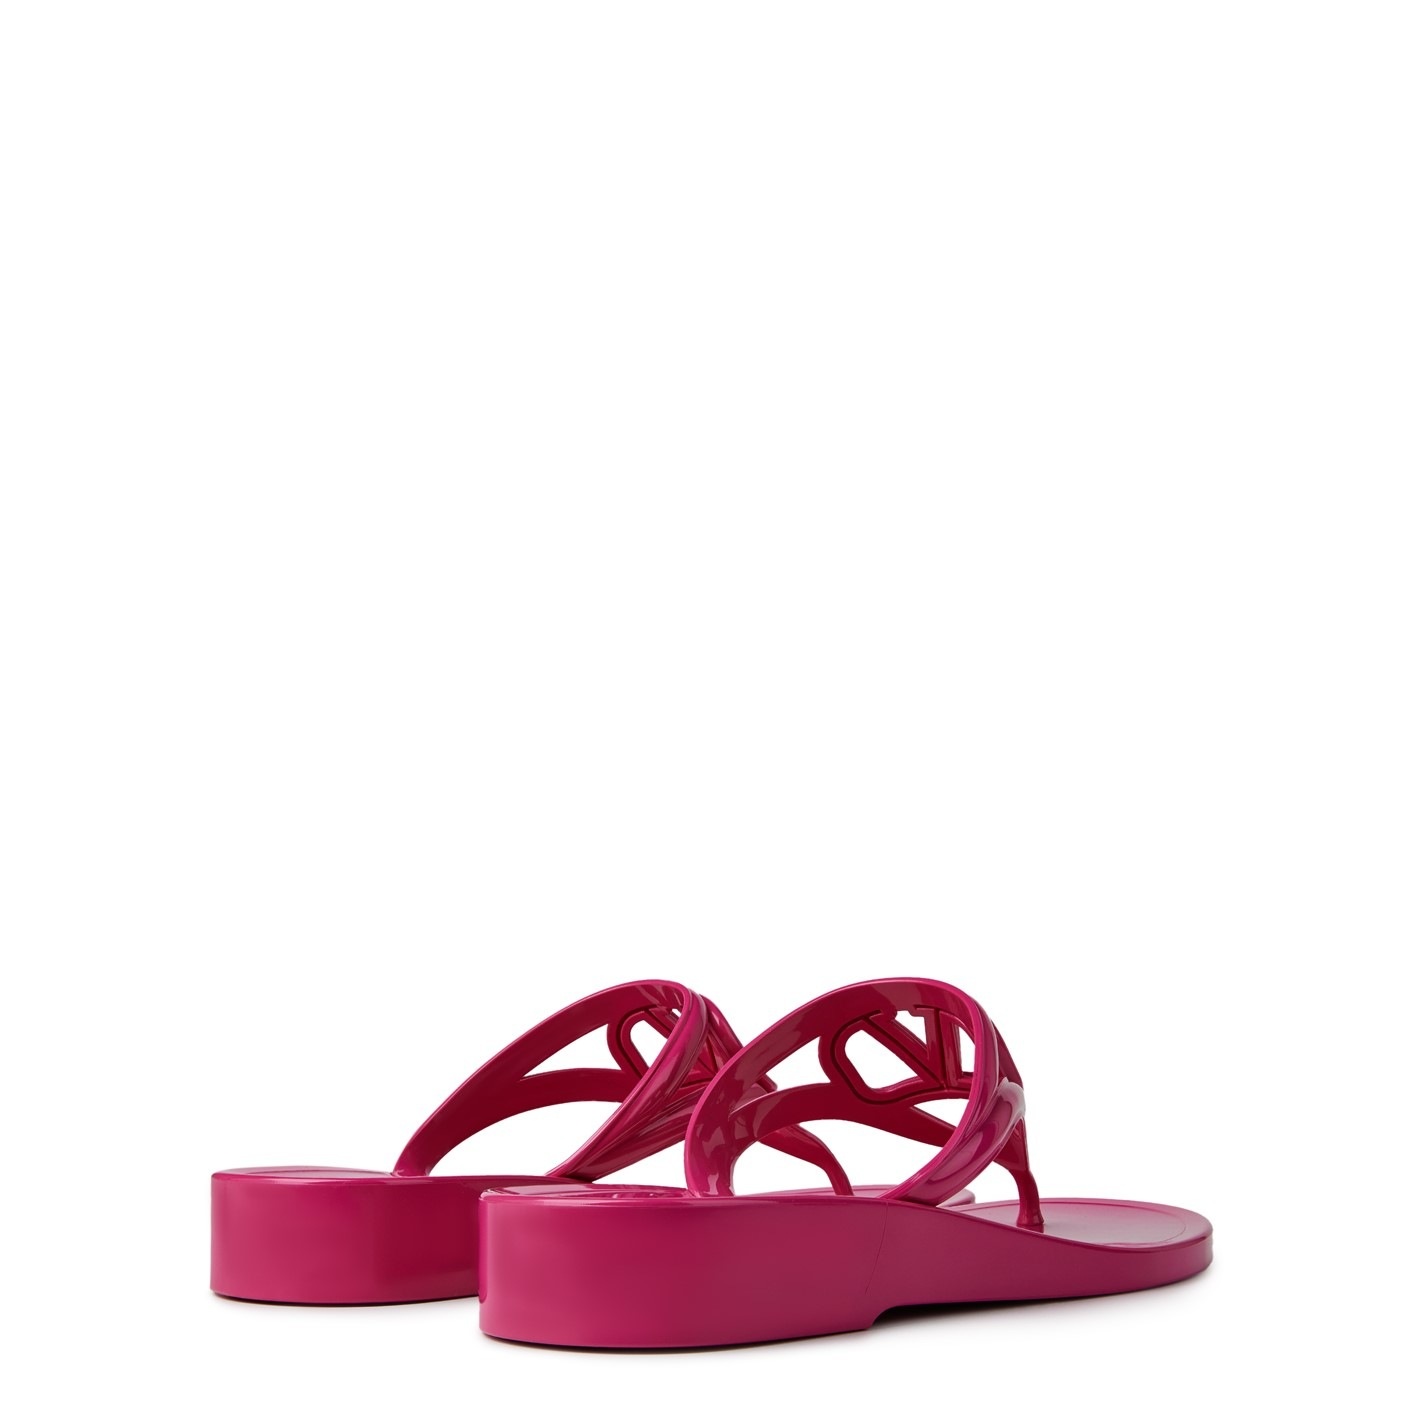 RUBBER THONG SANDALS - 5